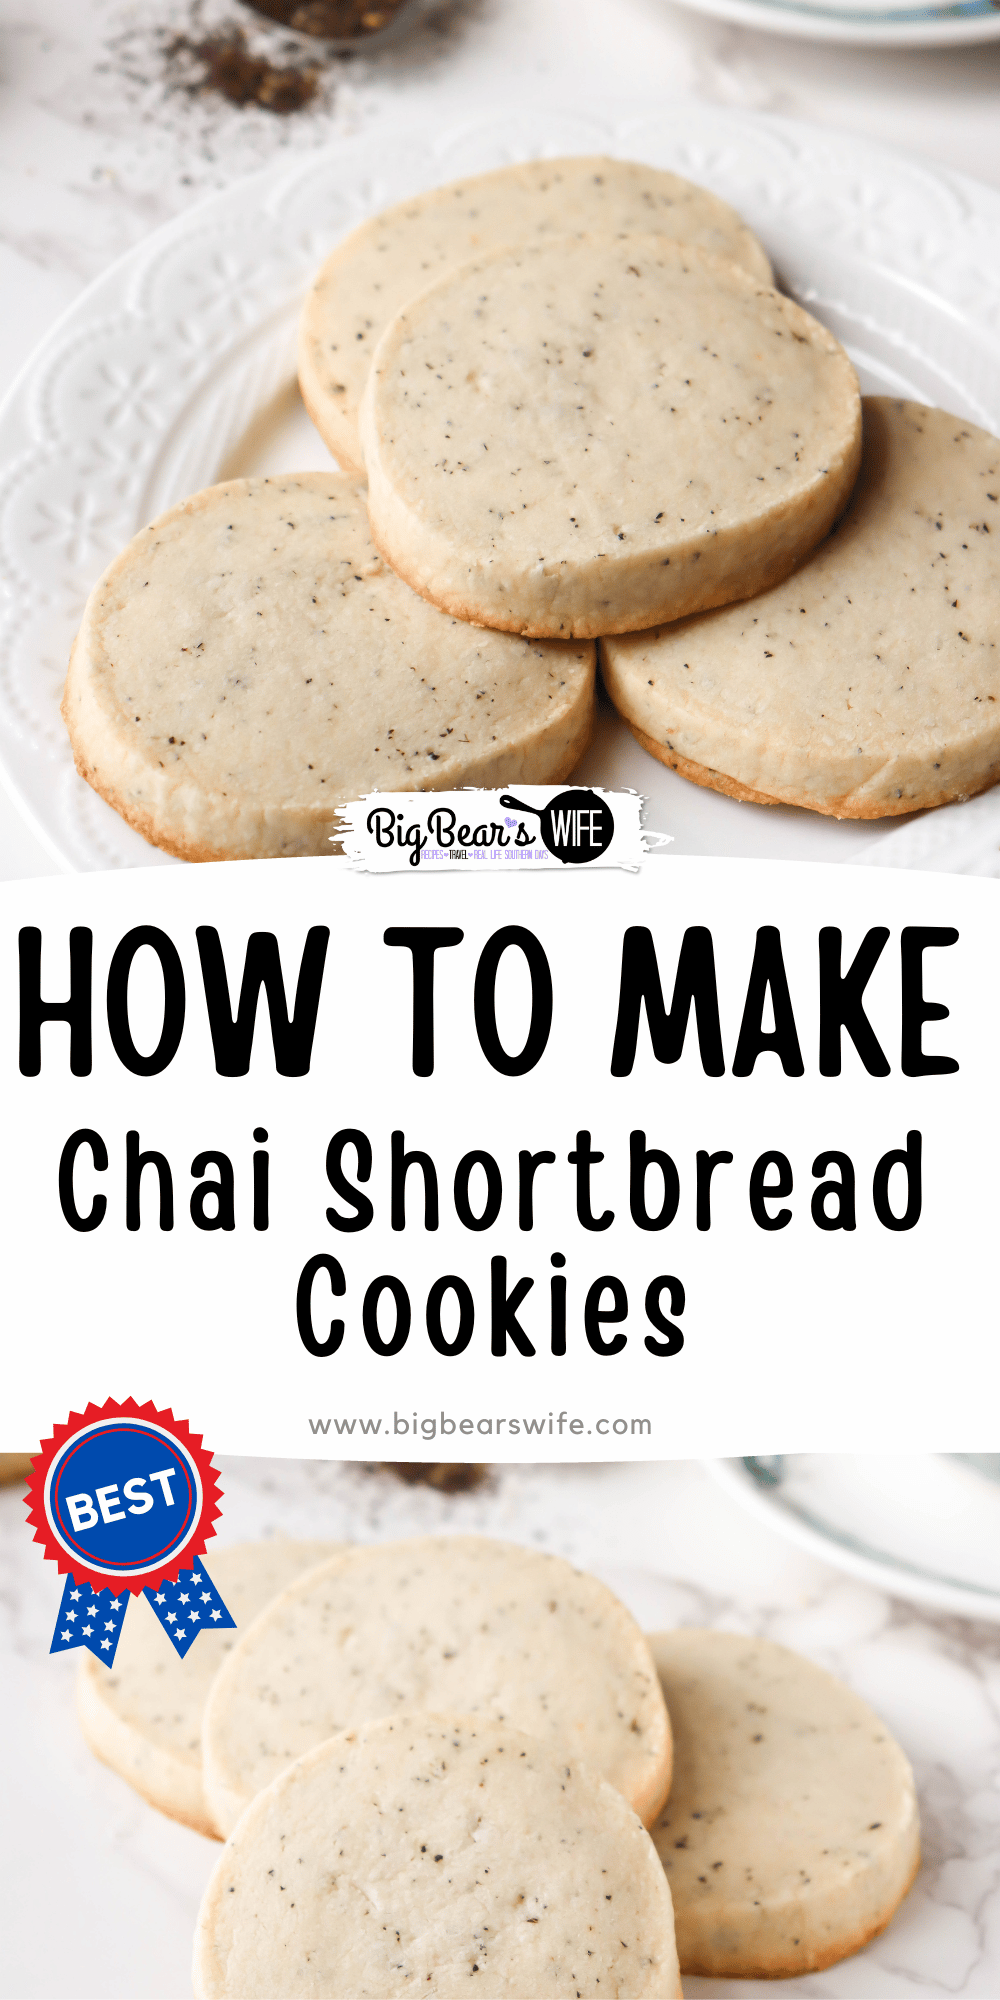 These wonderful slice-and-bake Chai Shortbread Cookies are filled with the warm spices of chai tea and so easy to make. Serve them up with a warm cup of chai, milk or coffee for a cozy treat. via @bigbearswife